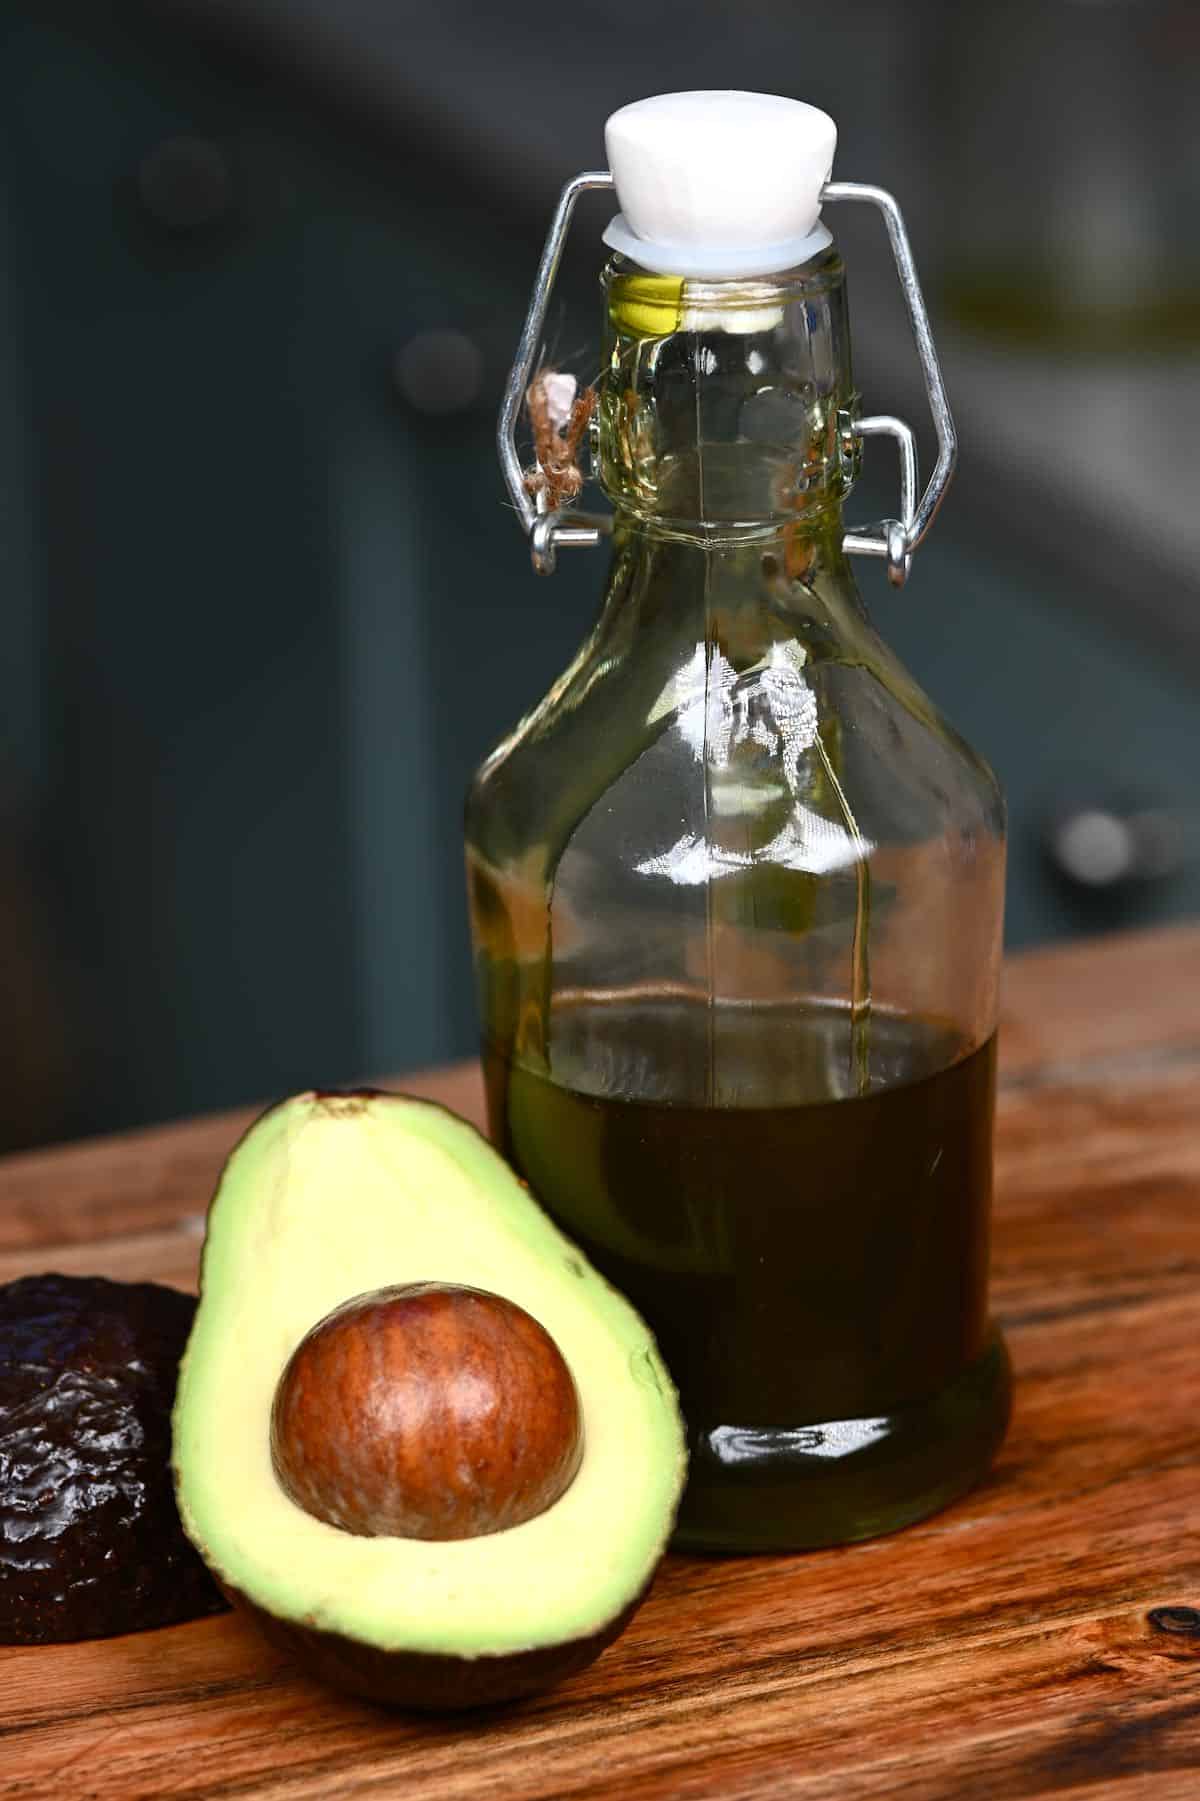 Half an avocado and a small bottle with avocado oil